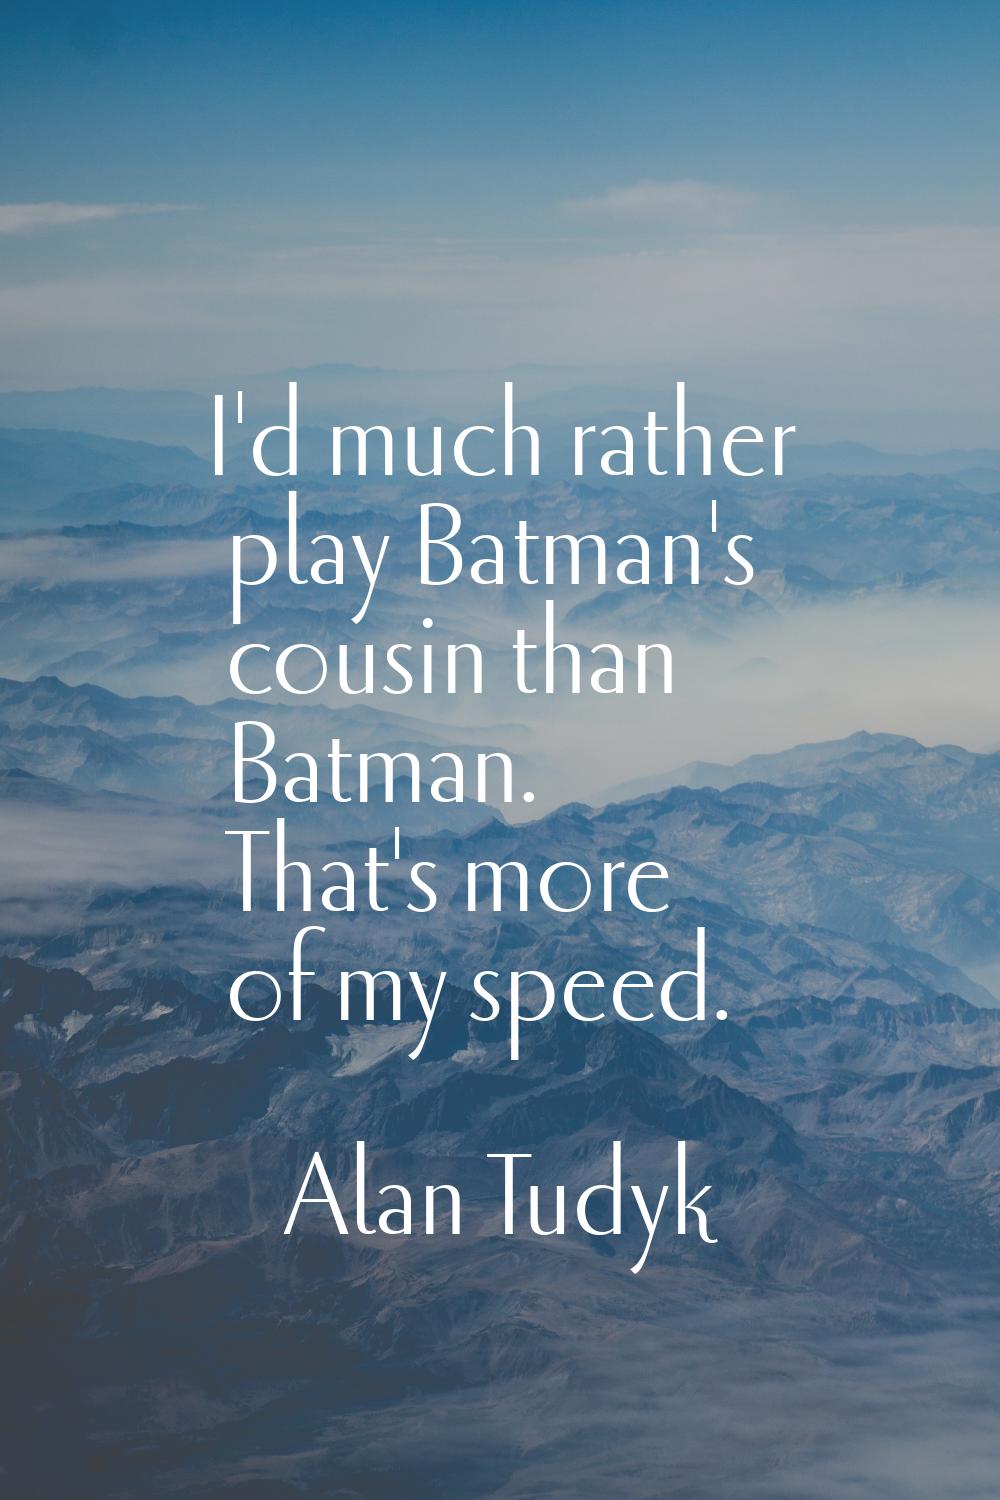 I'd much rather play Batman's cousin than Batman. That's more of my speed.